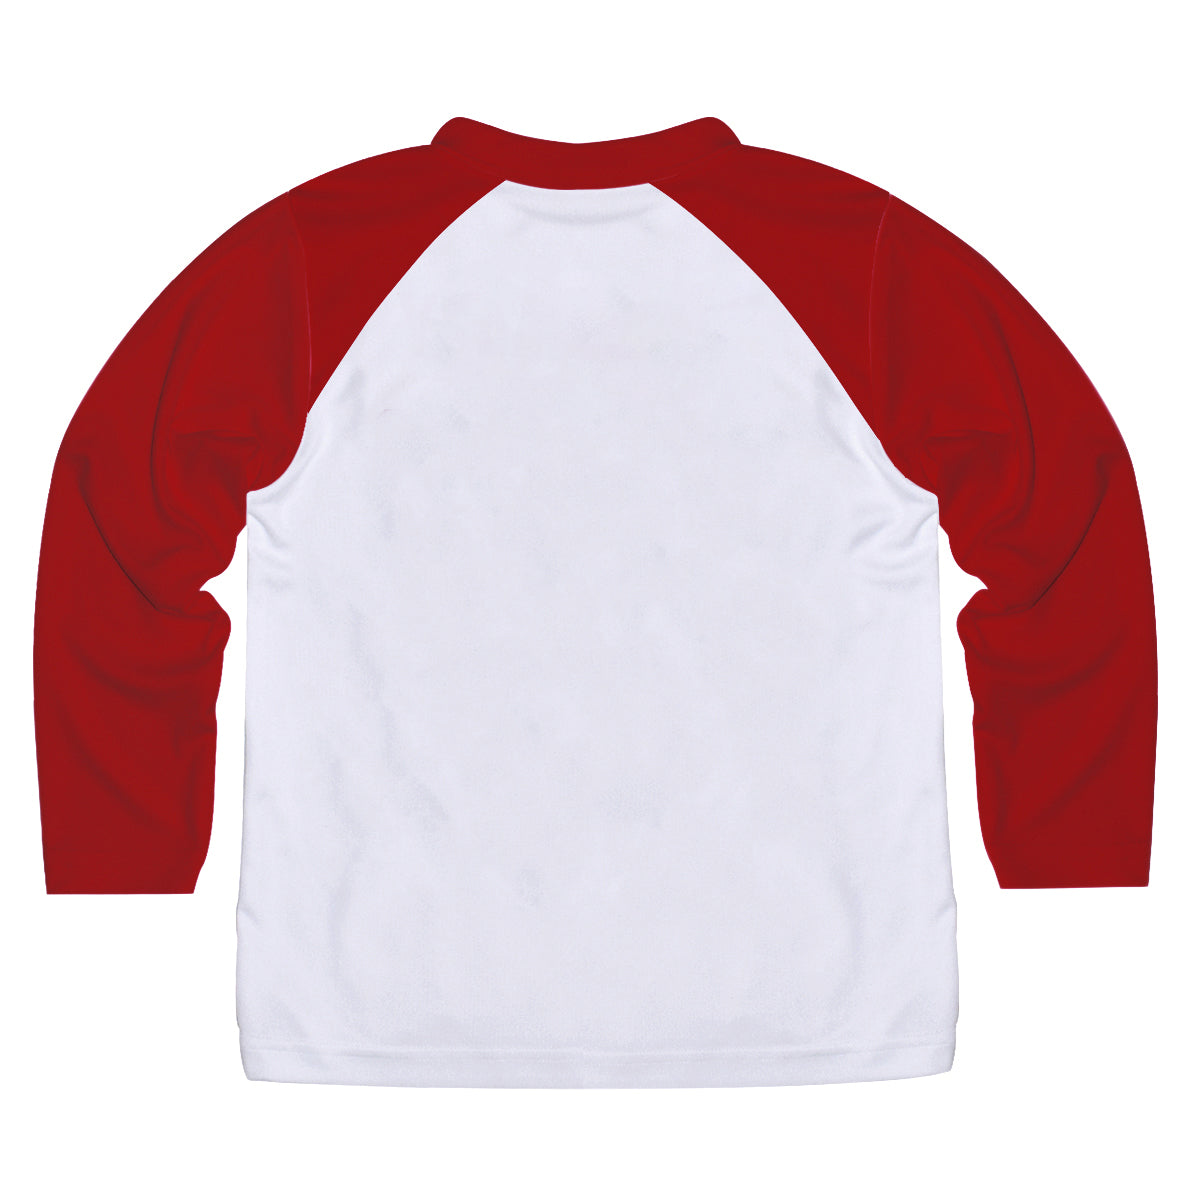 Baseball Player Personalized Name White and Red Raglan Long Sleeve Tee Shirt - Wimziy&Co.